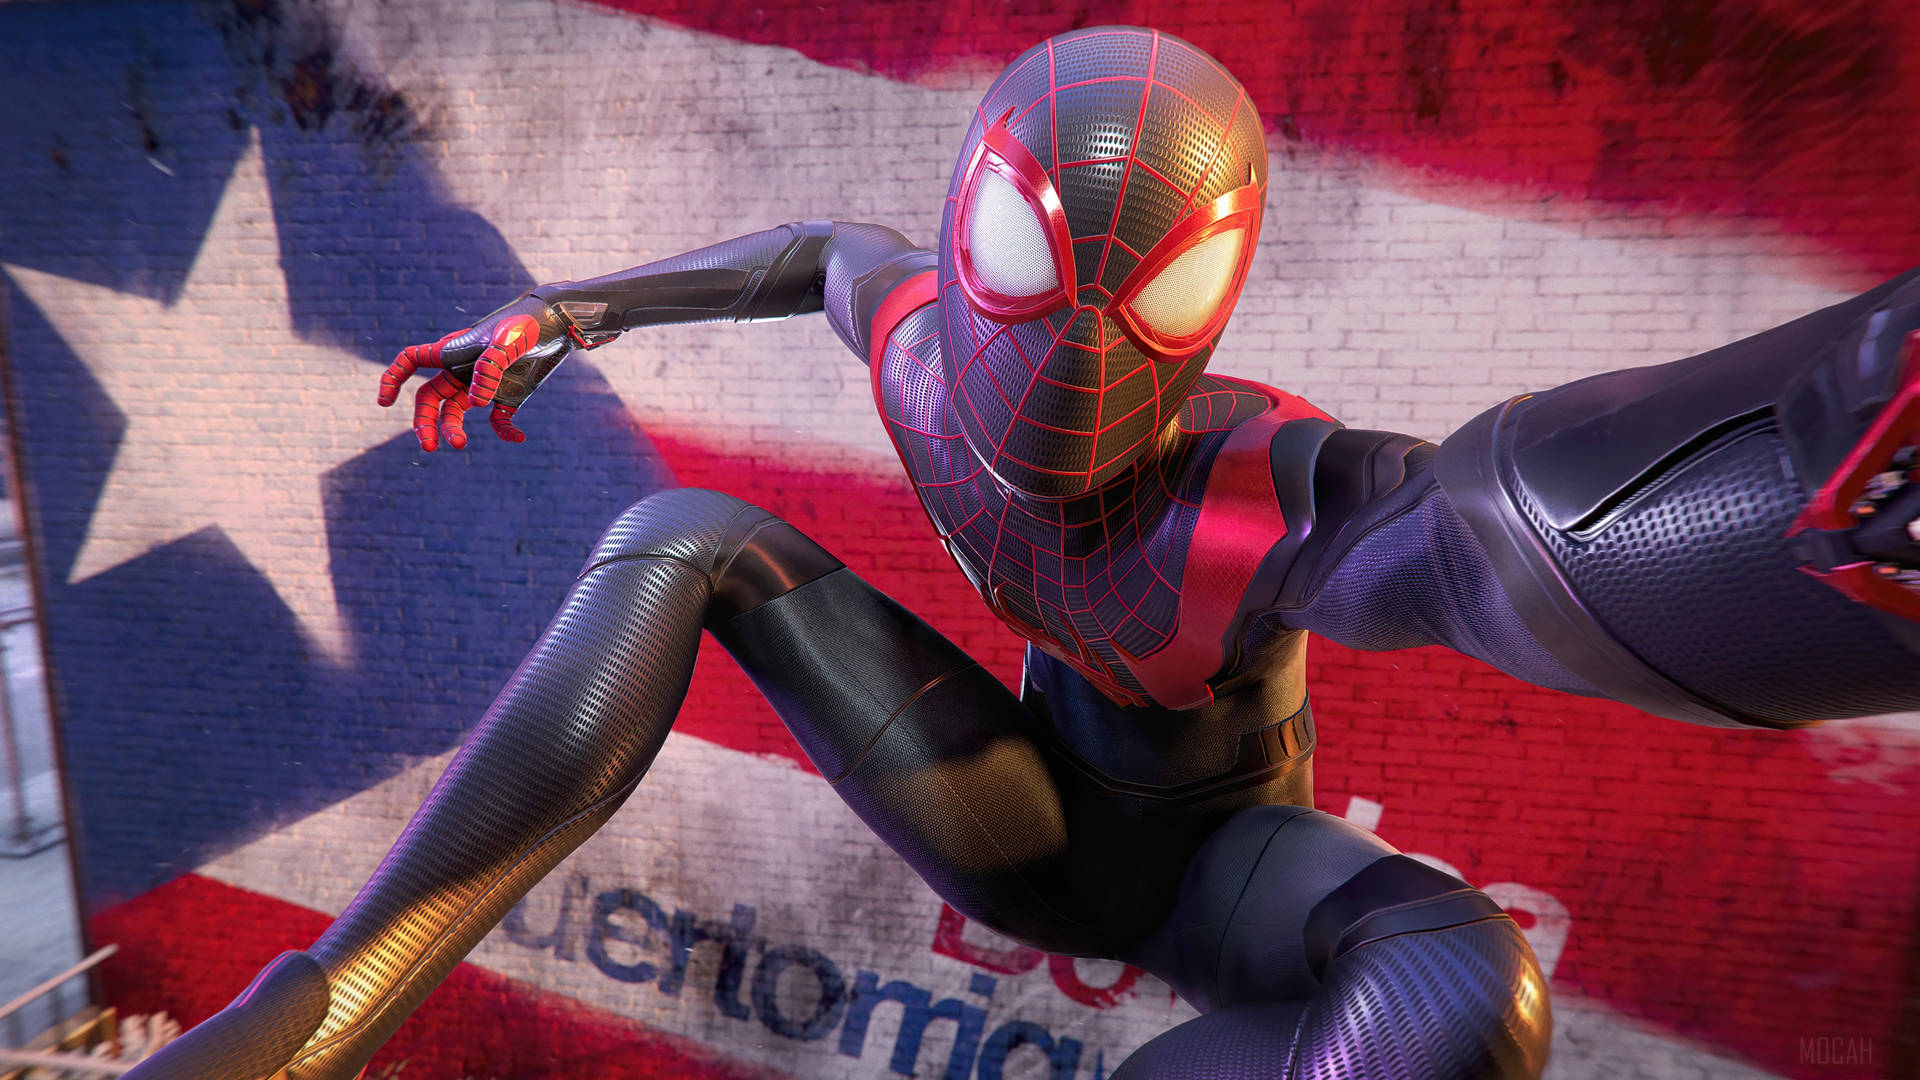 "Swinging into action on PS5 - Spider-Man Miles Morales" Wallpaper